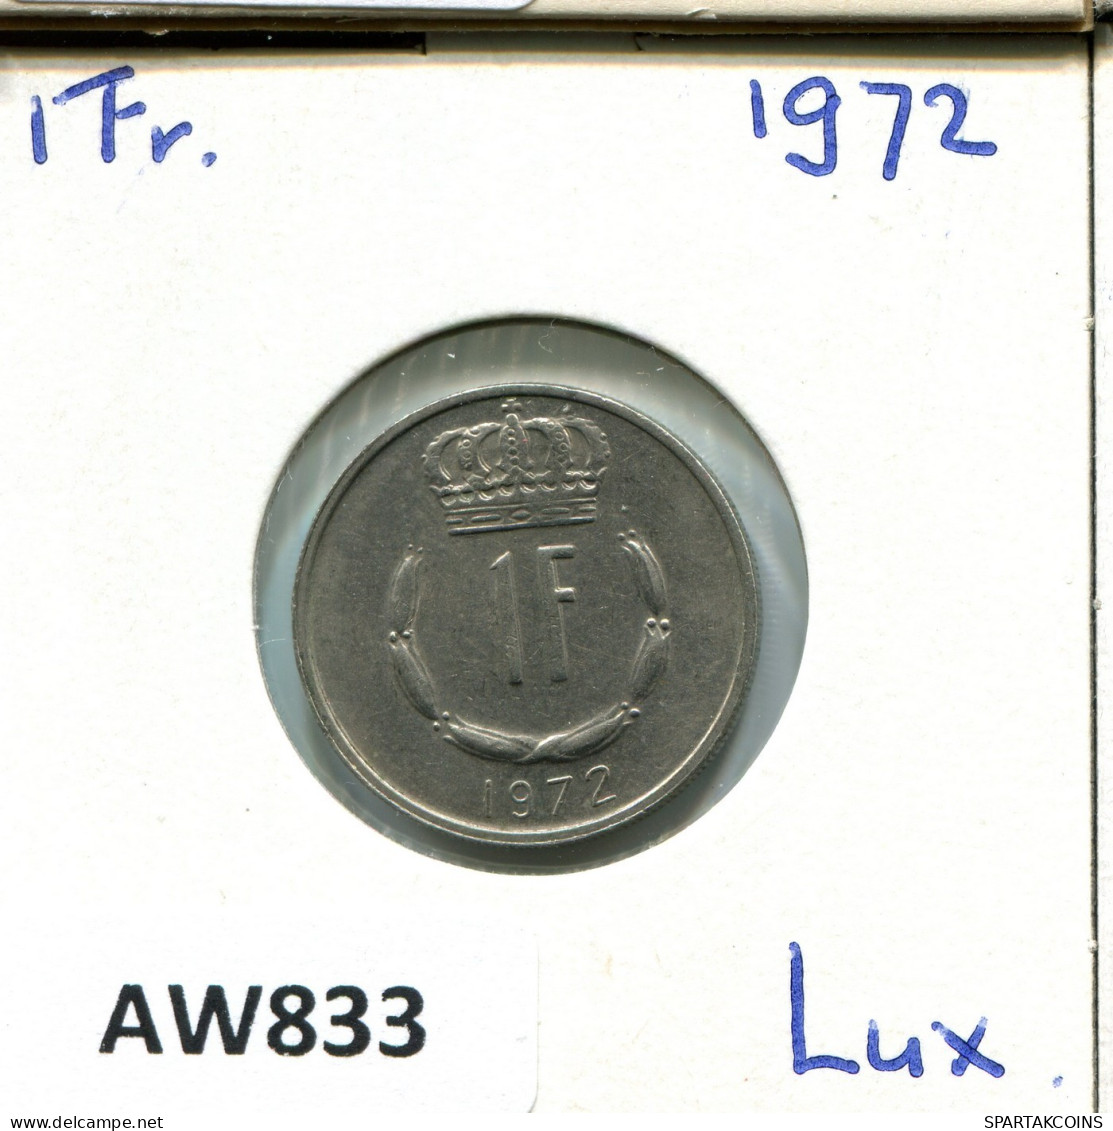 1 FRANC 1971 LUXEMBURG LUXEMBOURG Münze #AW833.D.A - Luxembourg